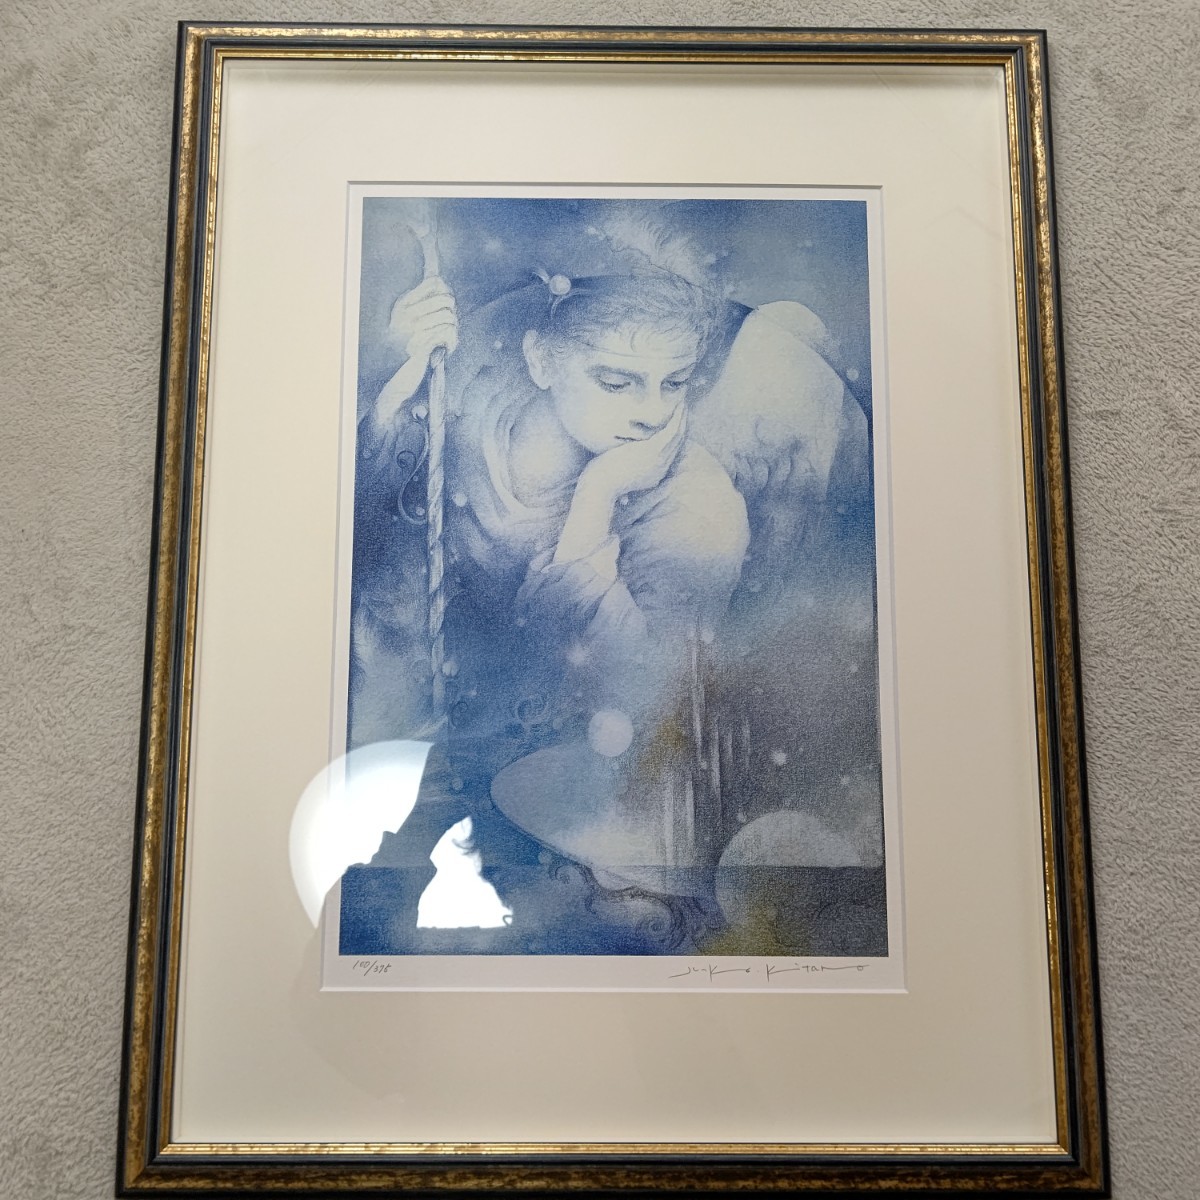 Junko Kitano Framed Lithograph Philosophia Colored Pencil Drawing Angel Art Vivant Guaranteed Signed Handwritten Painting, Artwork, Painting, others